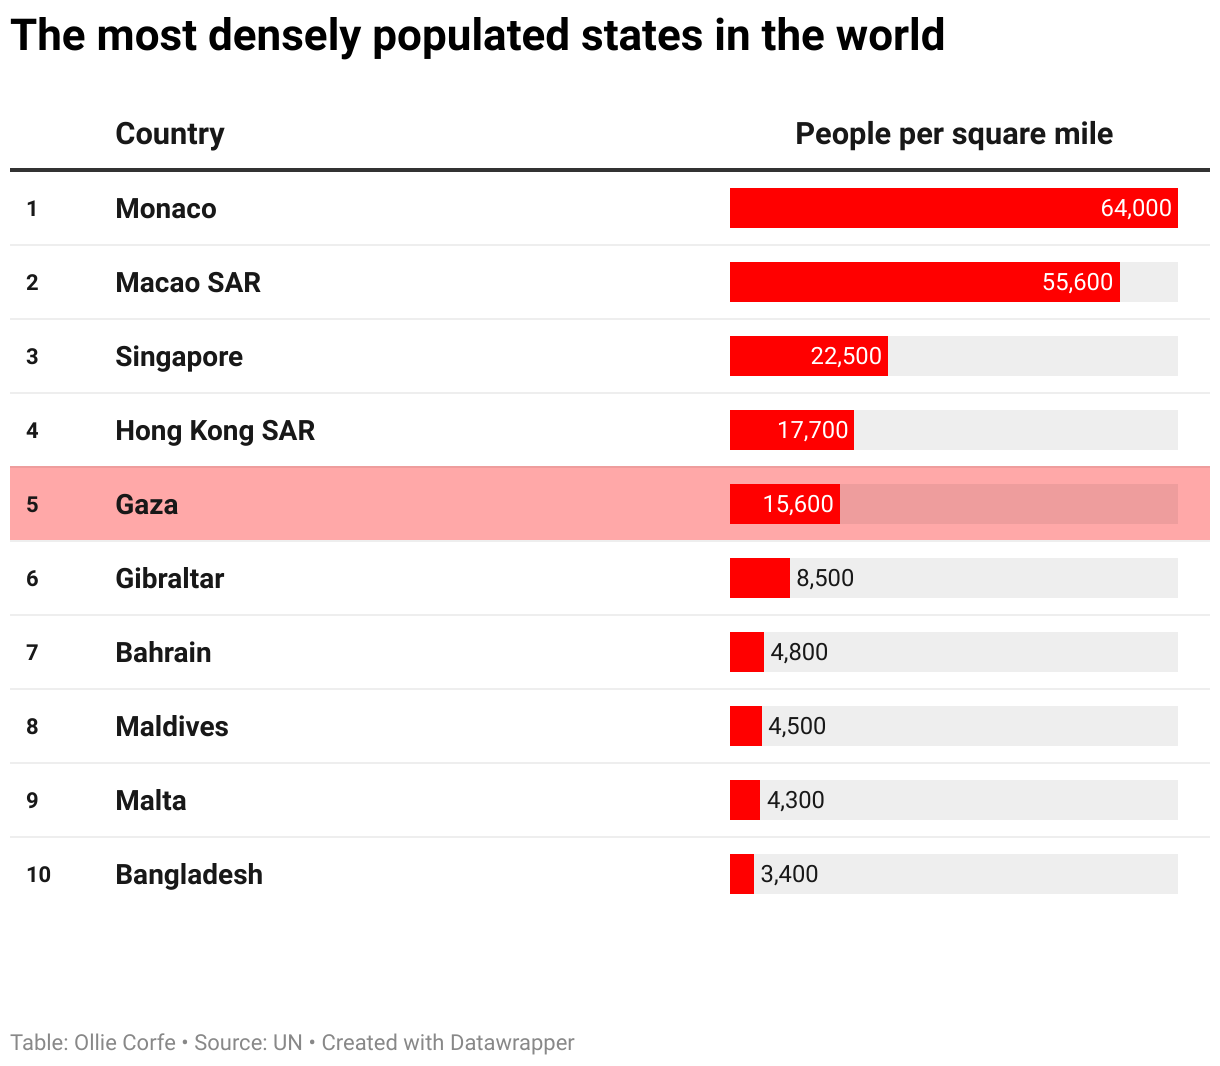 Top 10 states by population density.